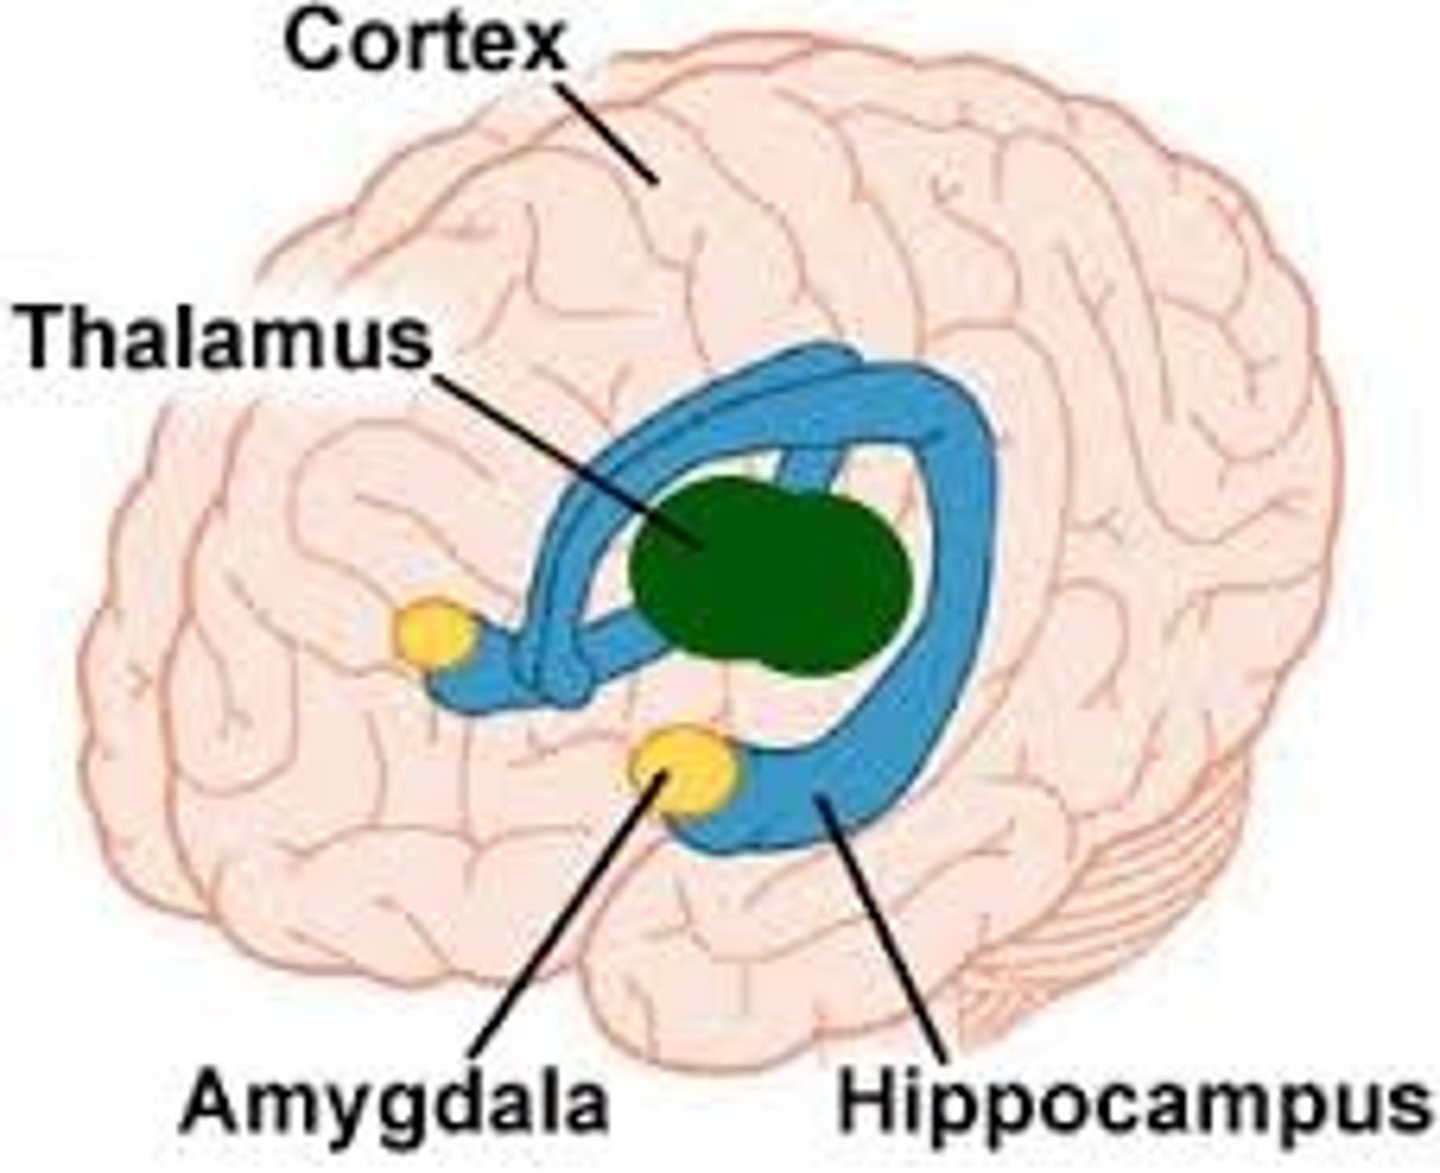 <p>Nuclei (bundle of nerves) in the base of temporal lobe, produces emotion, mostly fear and defensive responses (fight or flight)</p><p>Contains the:</p><p>-Lateral amygdala</p><p>-Basolateral amygdala</p><p>-Central nucleus of amygdala</p><p>-info moves lateral to medial and comes from auditory cortex and auditory thalamus</p><p>NEED TO KNOW HOW TO DRAW THIS</p>